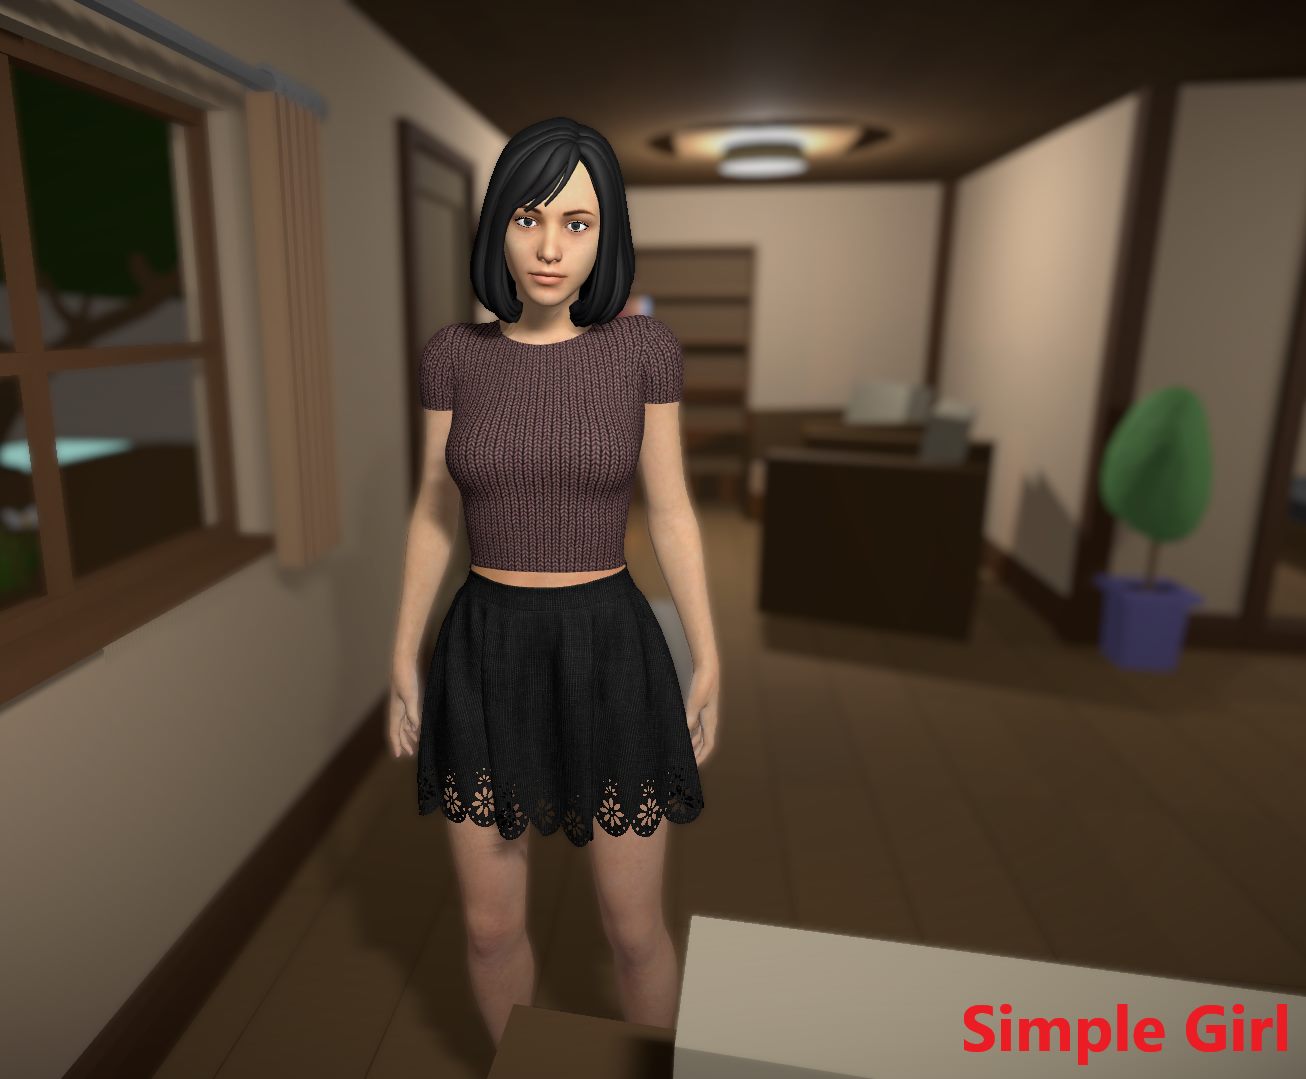 Simple Girl porn xxx game download cover